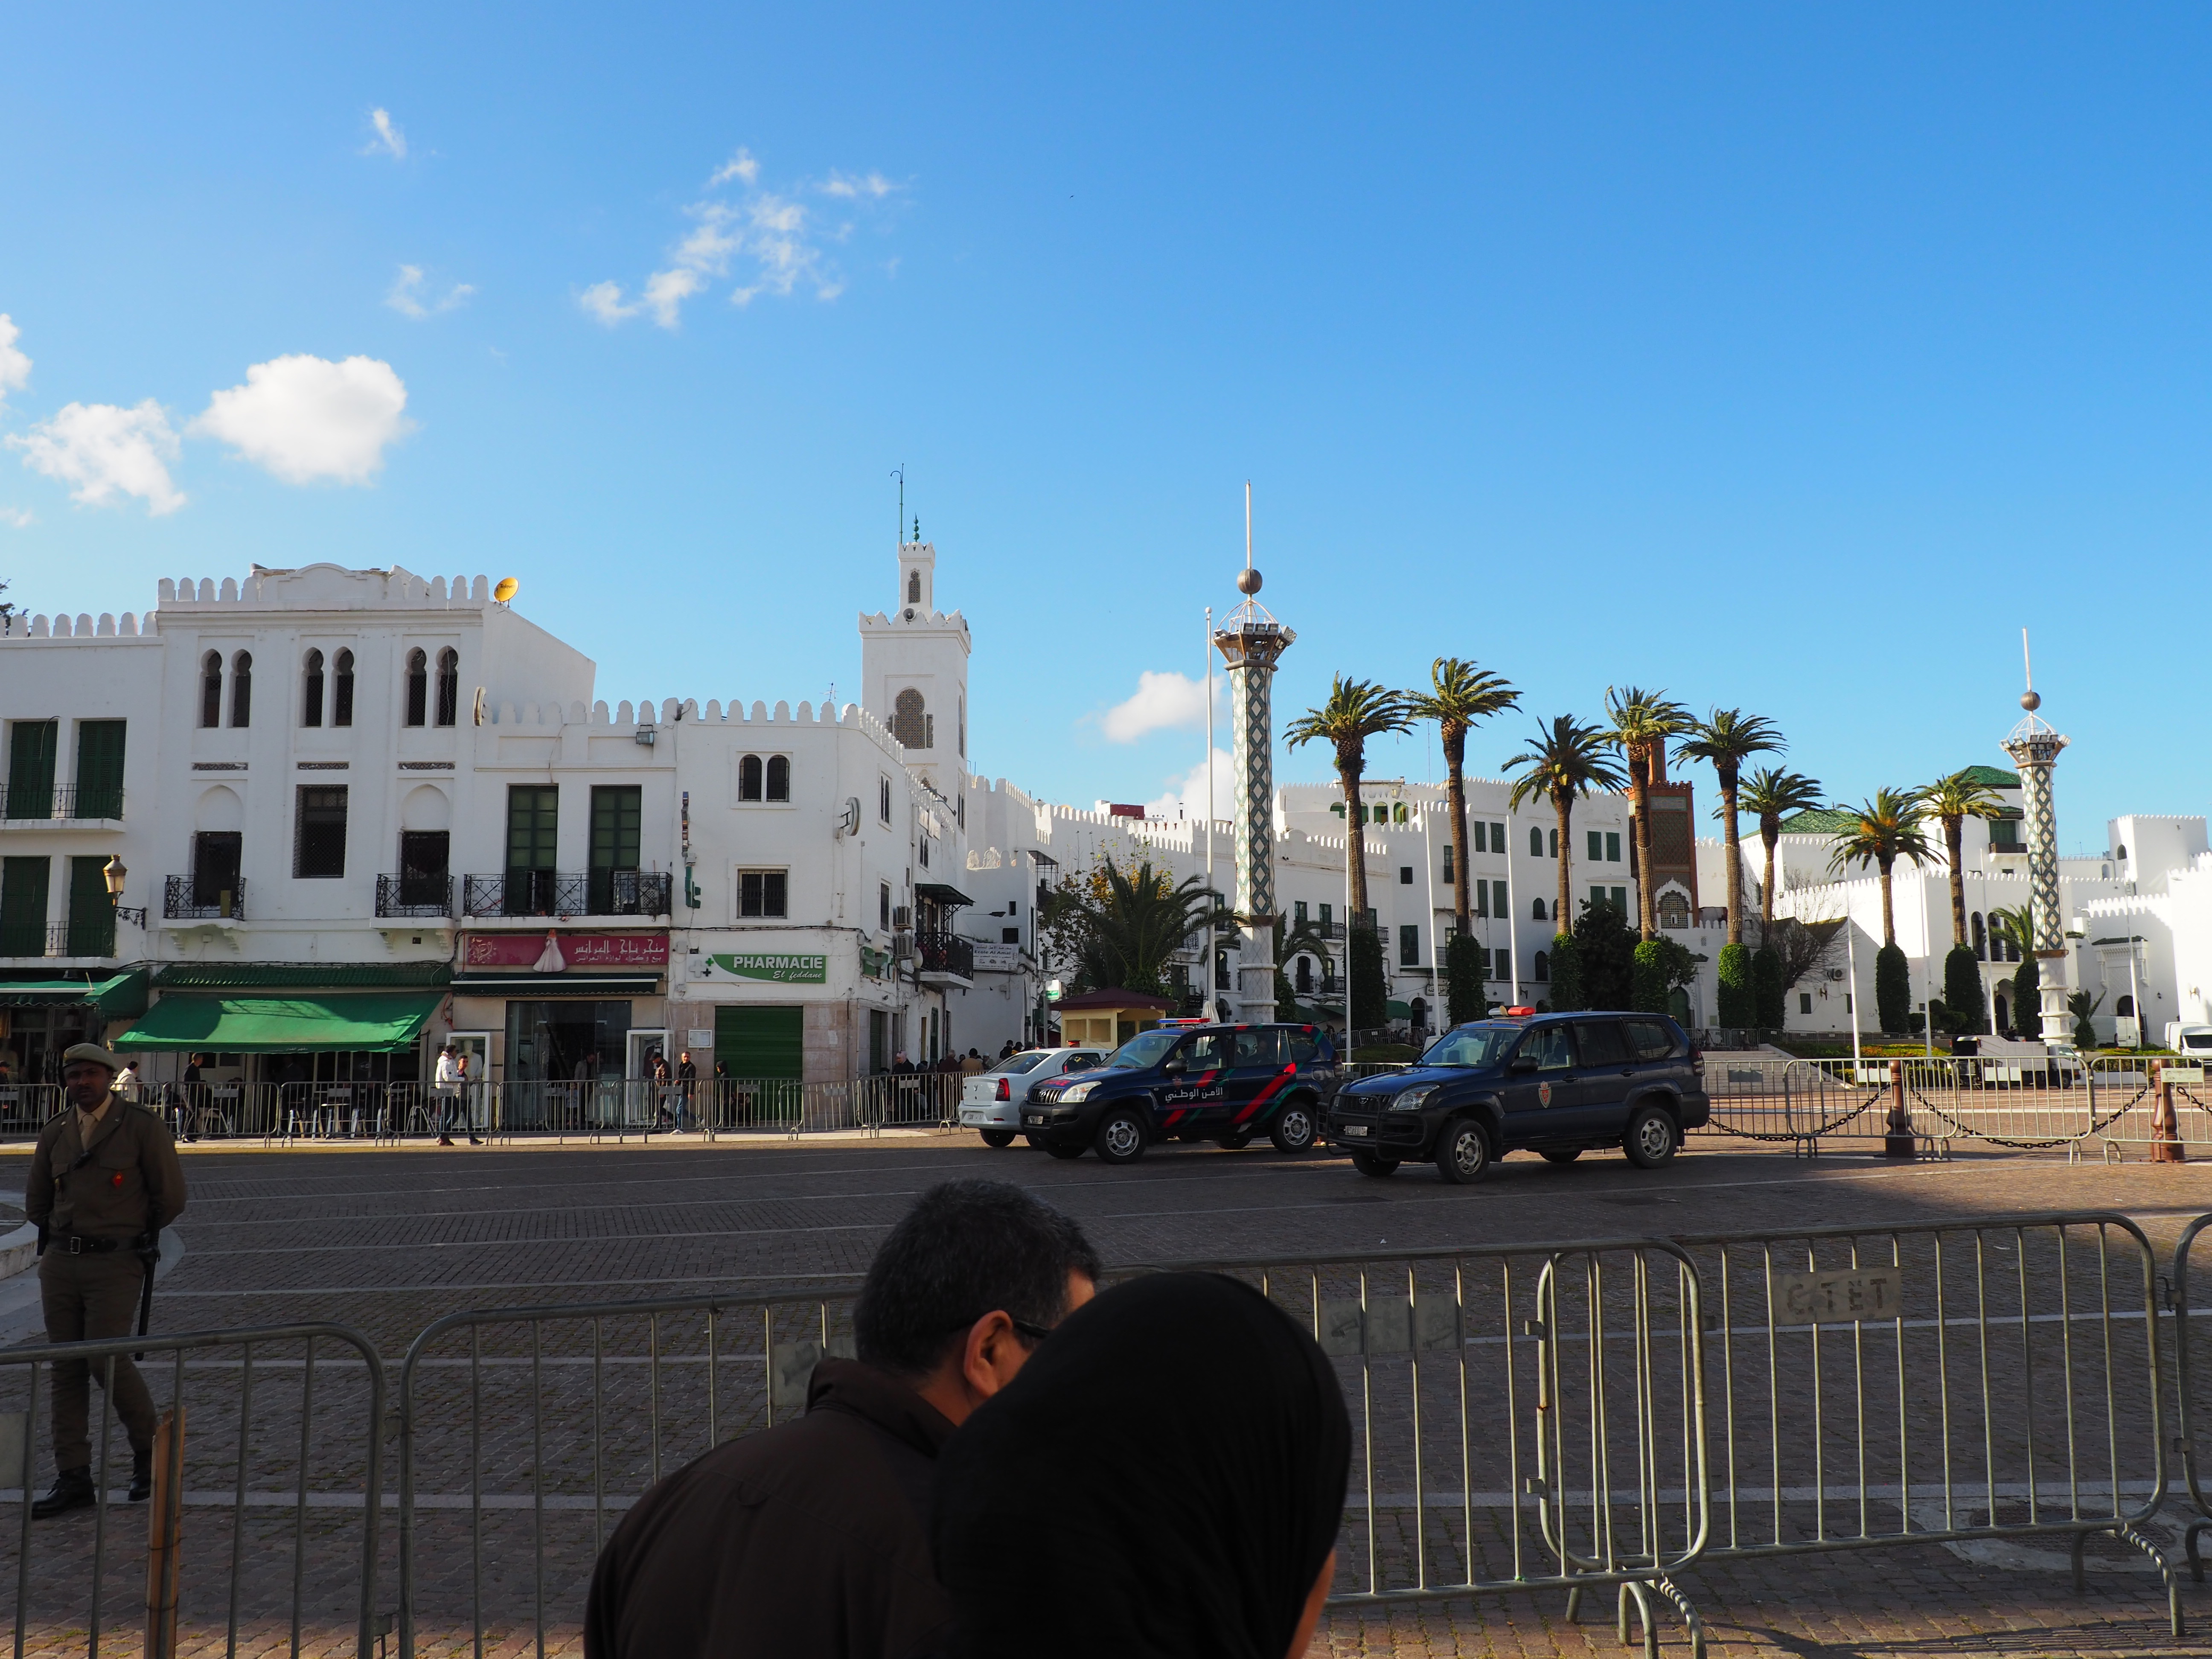 <p>View from the south side of the square toward Avenue Mohamed V, in view the towers on the square and, behind them, minarets of Zawiya Sidi Ben Aissa and Zawiya Sidi Abdallah El Hach.</p>